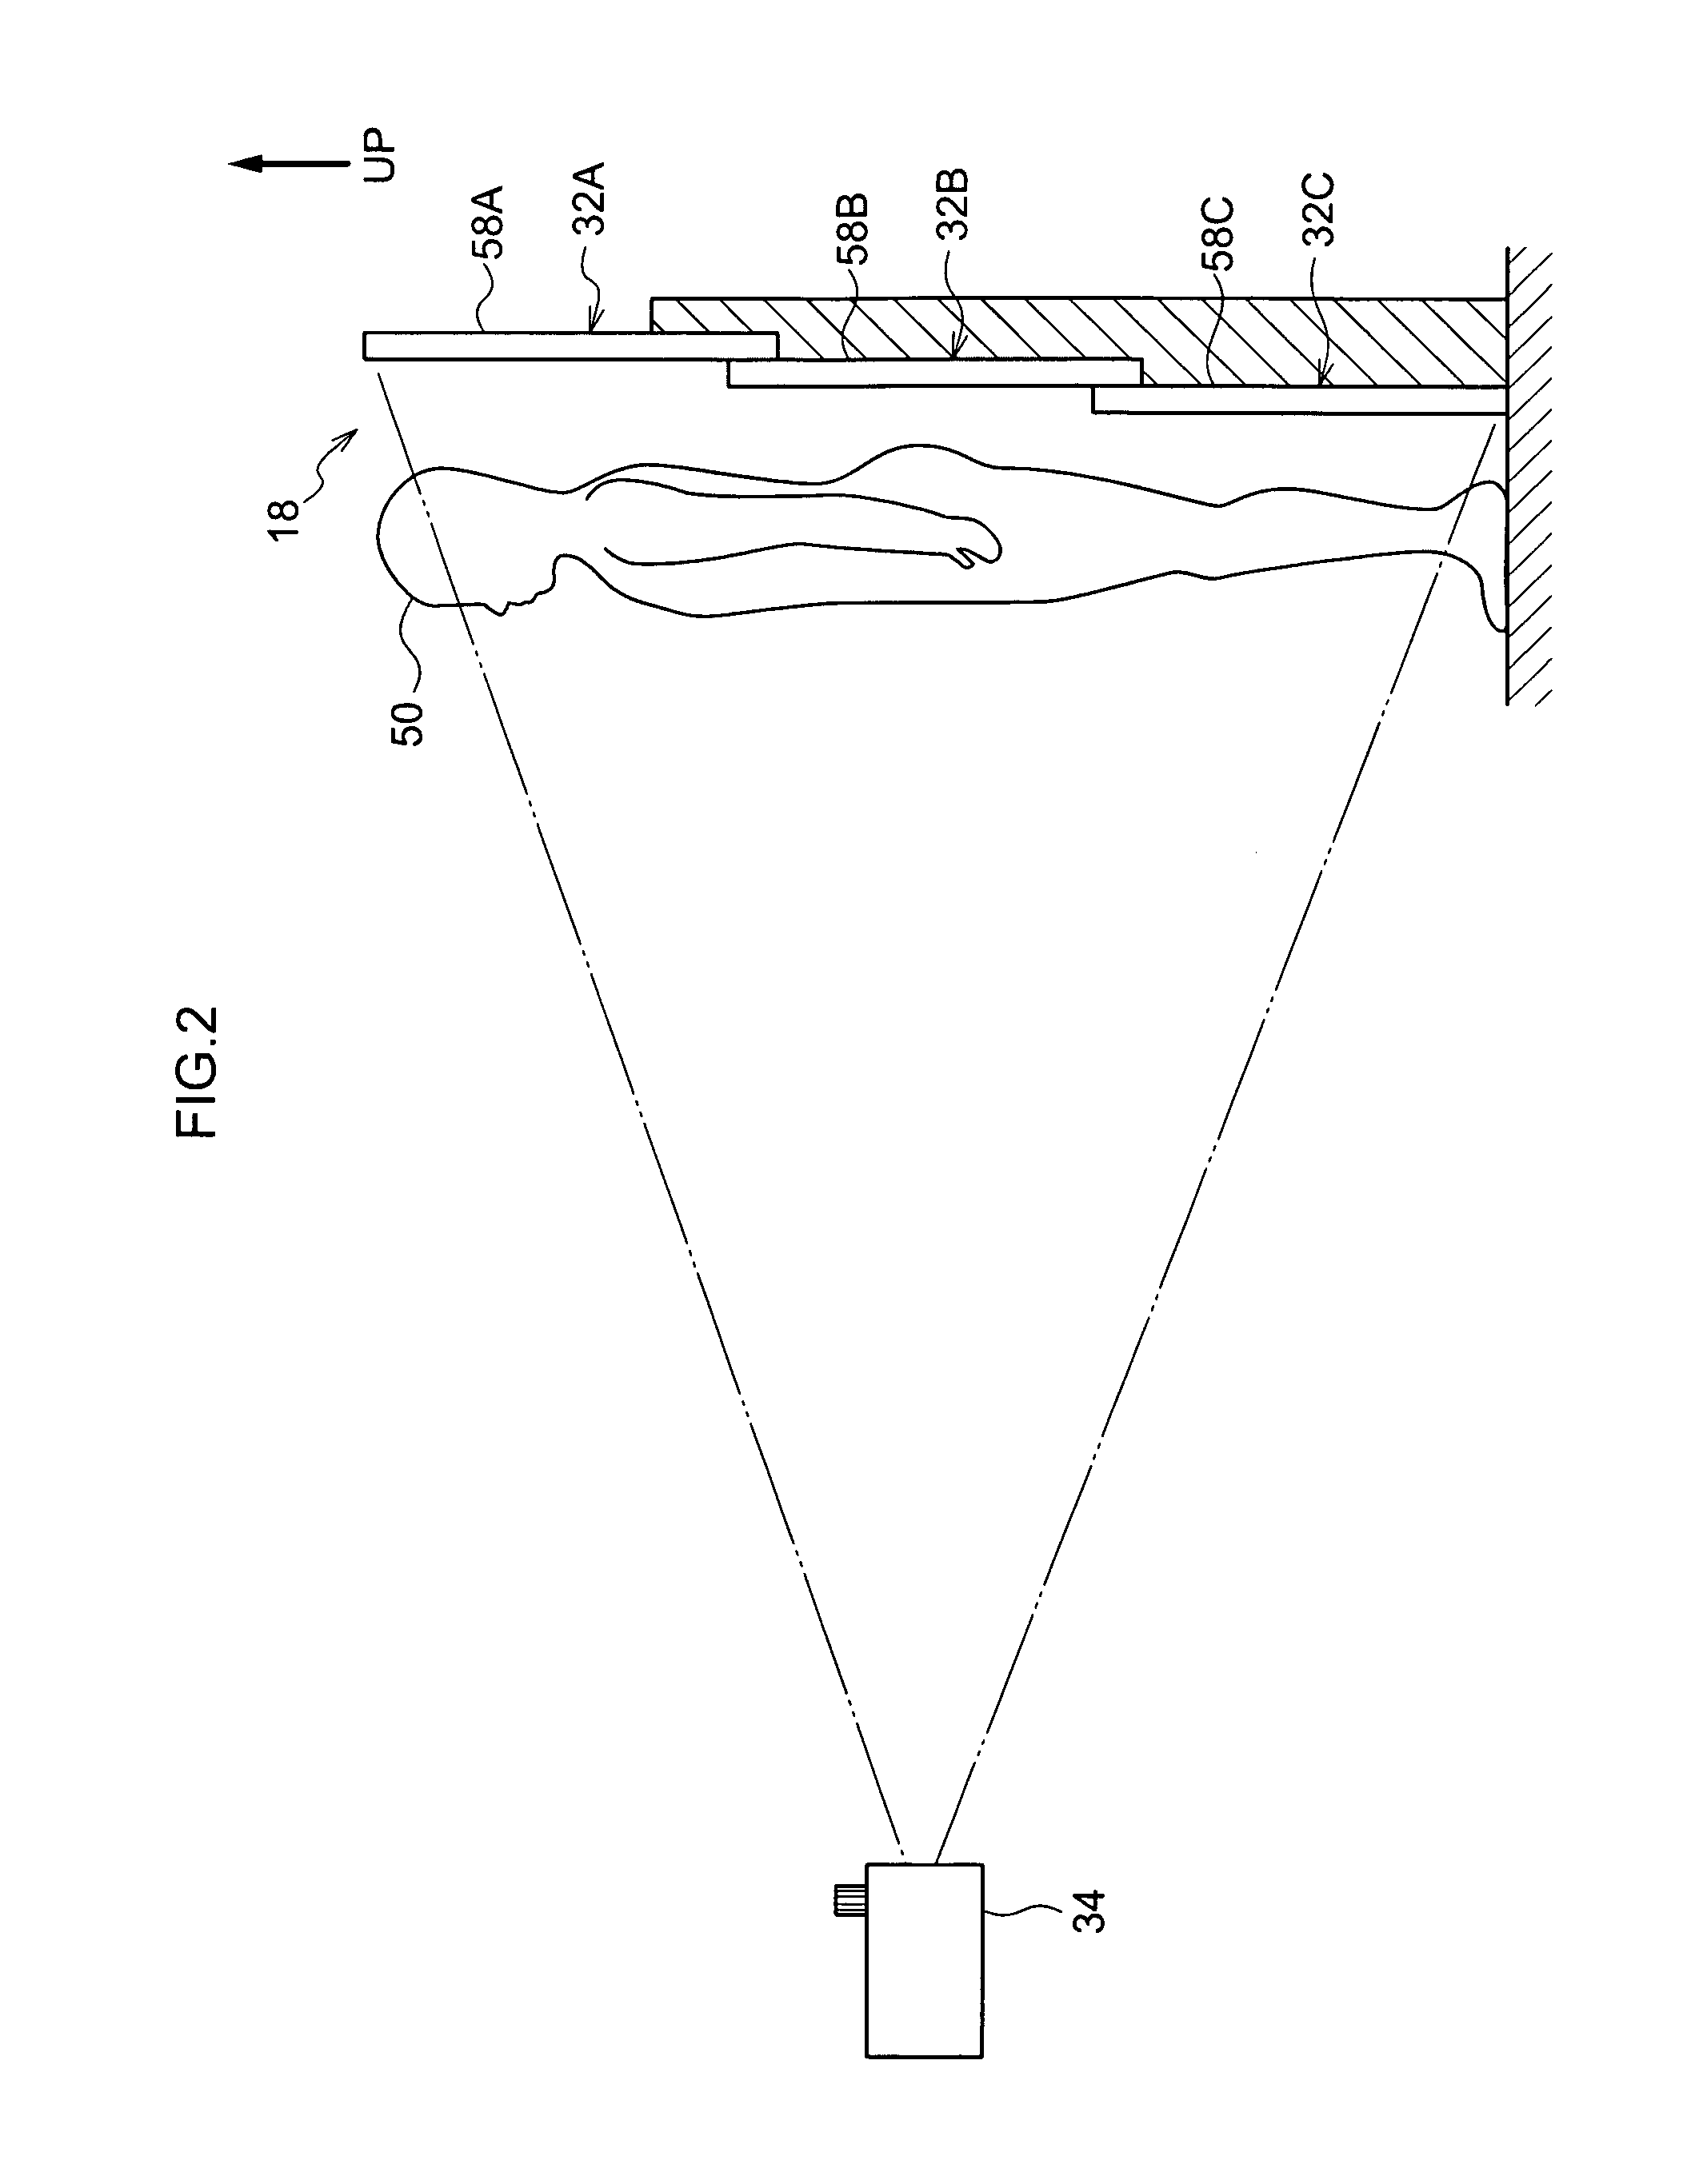 Radiographic image capture system and method